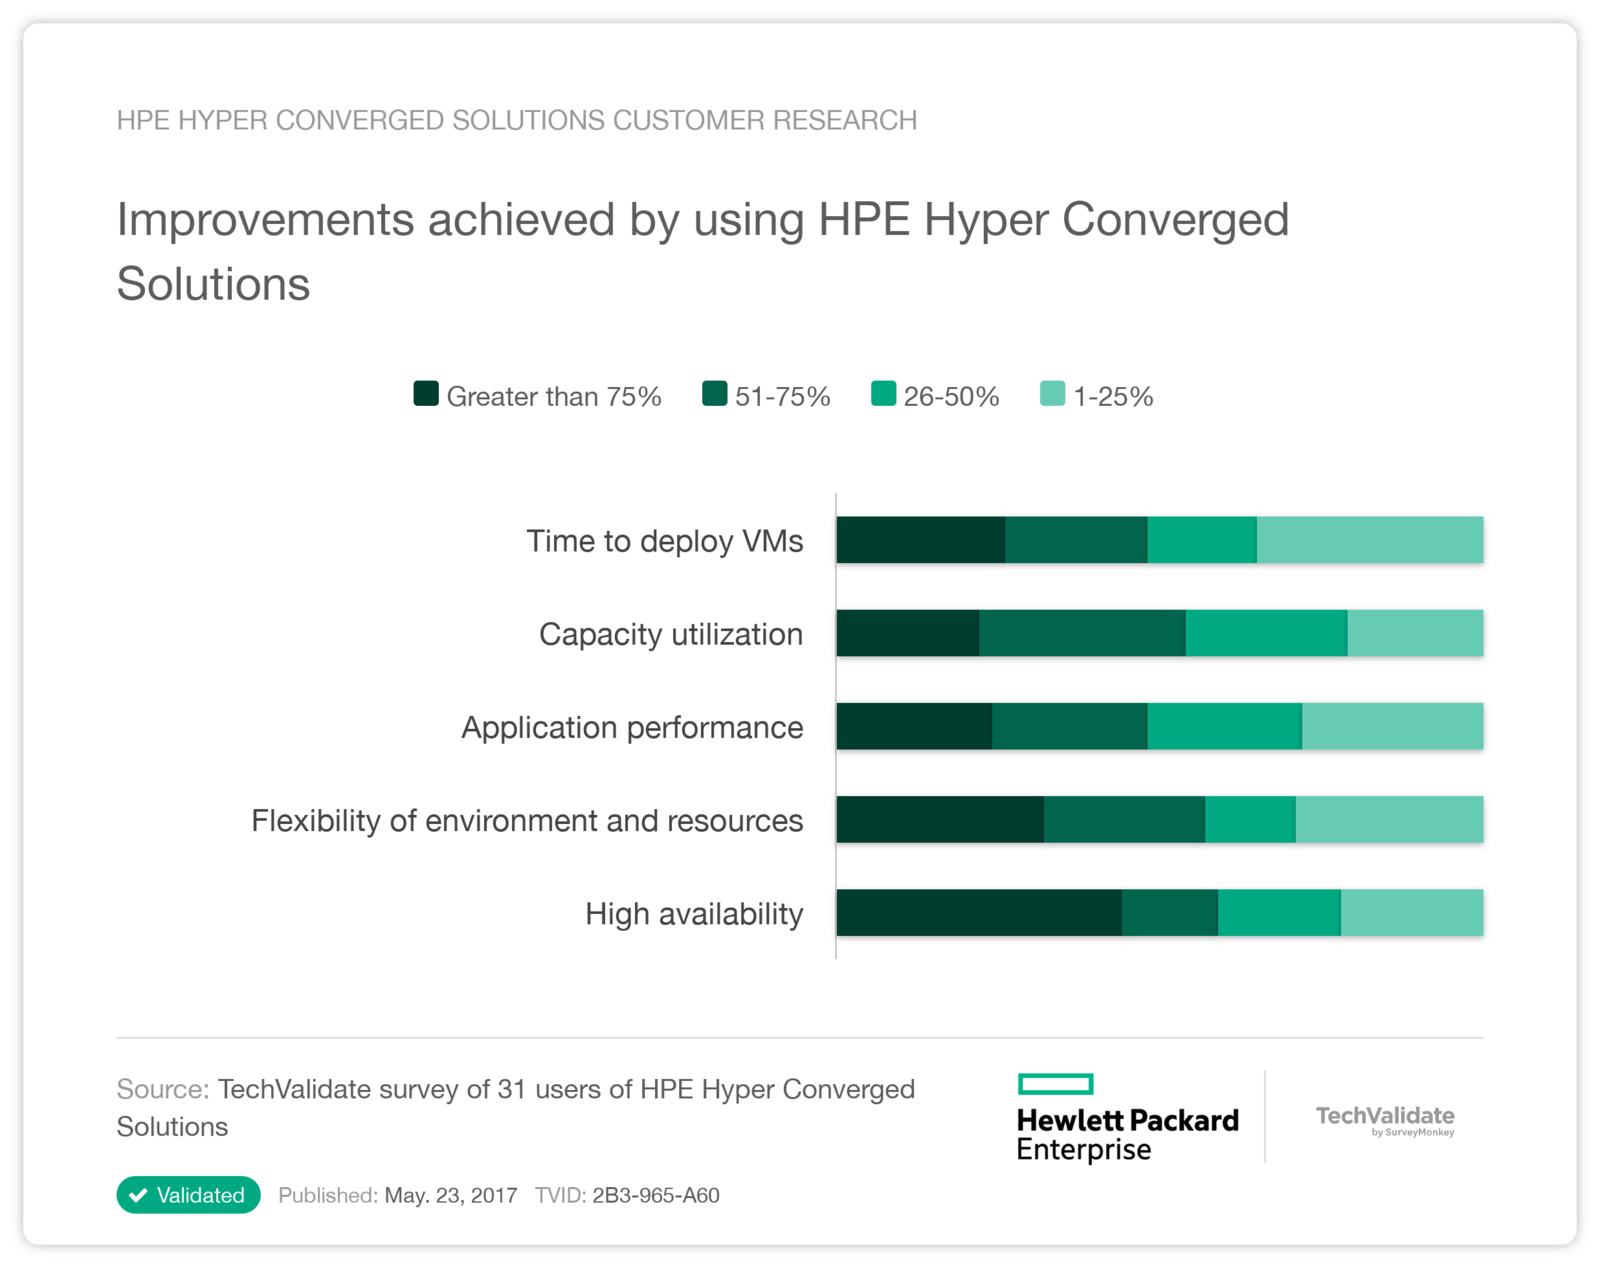 HPE Hyper Converged Solutions Customer Research